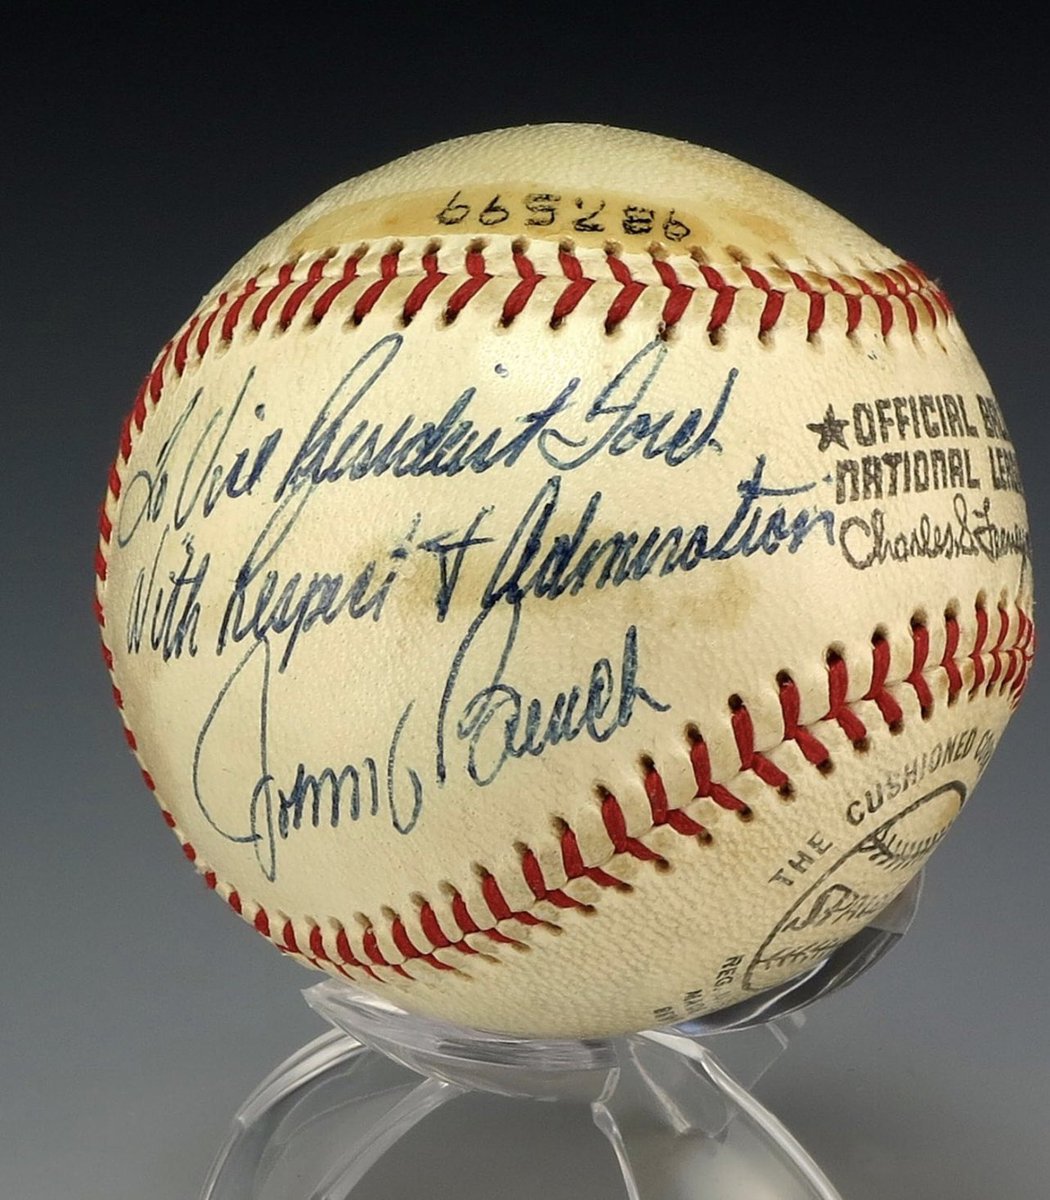 Baseball given to Vice President Gerald Ford 🇺🇸 by Johnny Bench, Opening Day 1974. Ford would become President later that season #POTUS ⚾️ @JohnnyBench_5 #OpeningDay